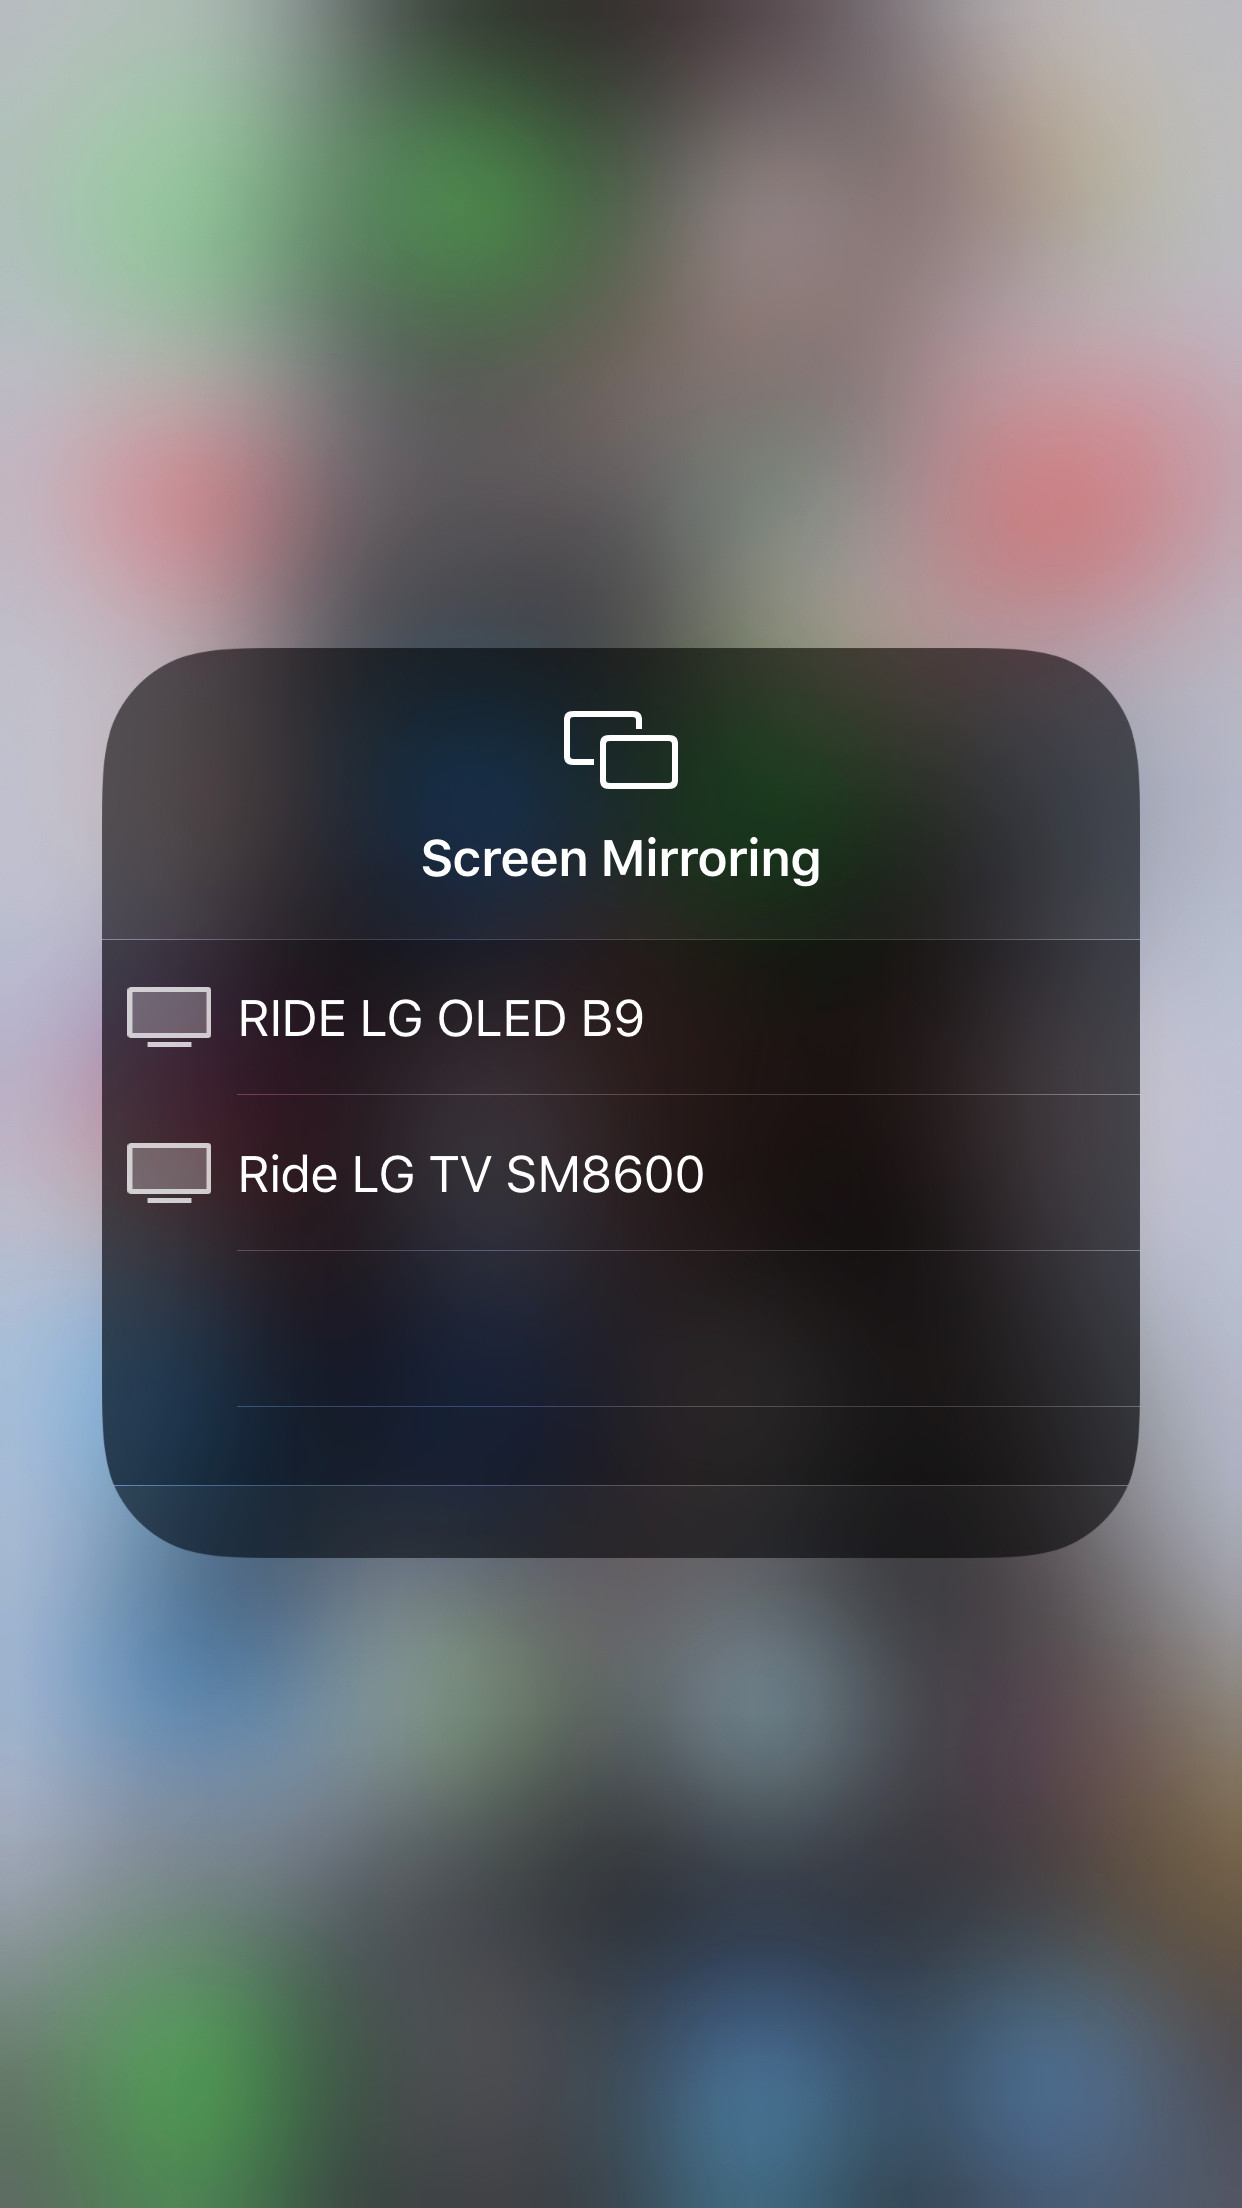 Remove Old Devices At Airplay Macos And, How To Delete Screen Mirroring On Ipad